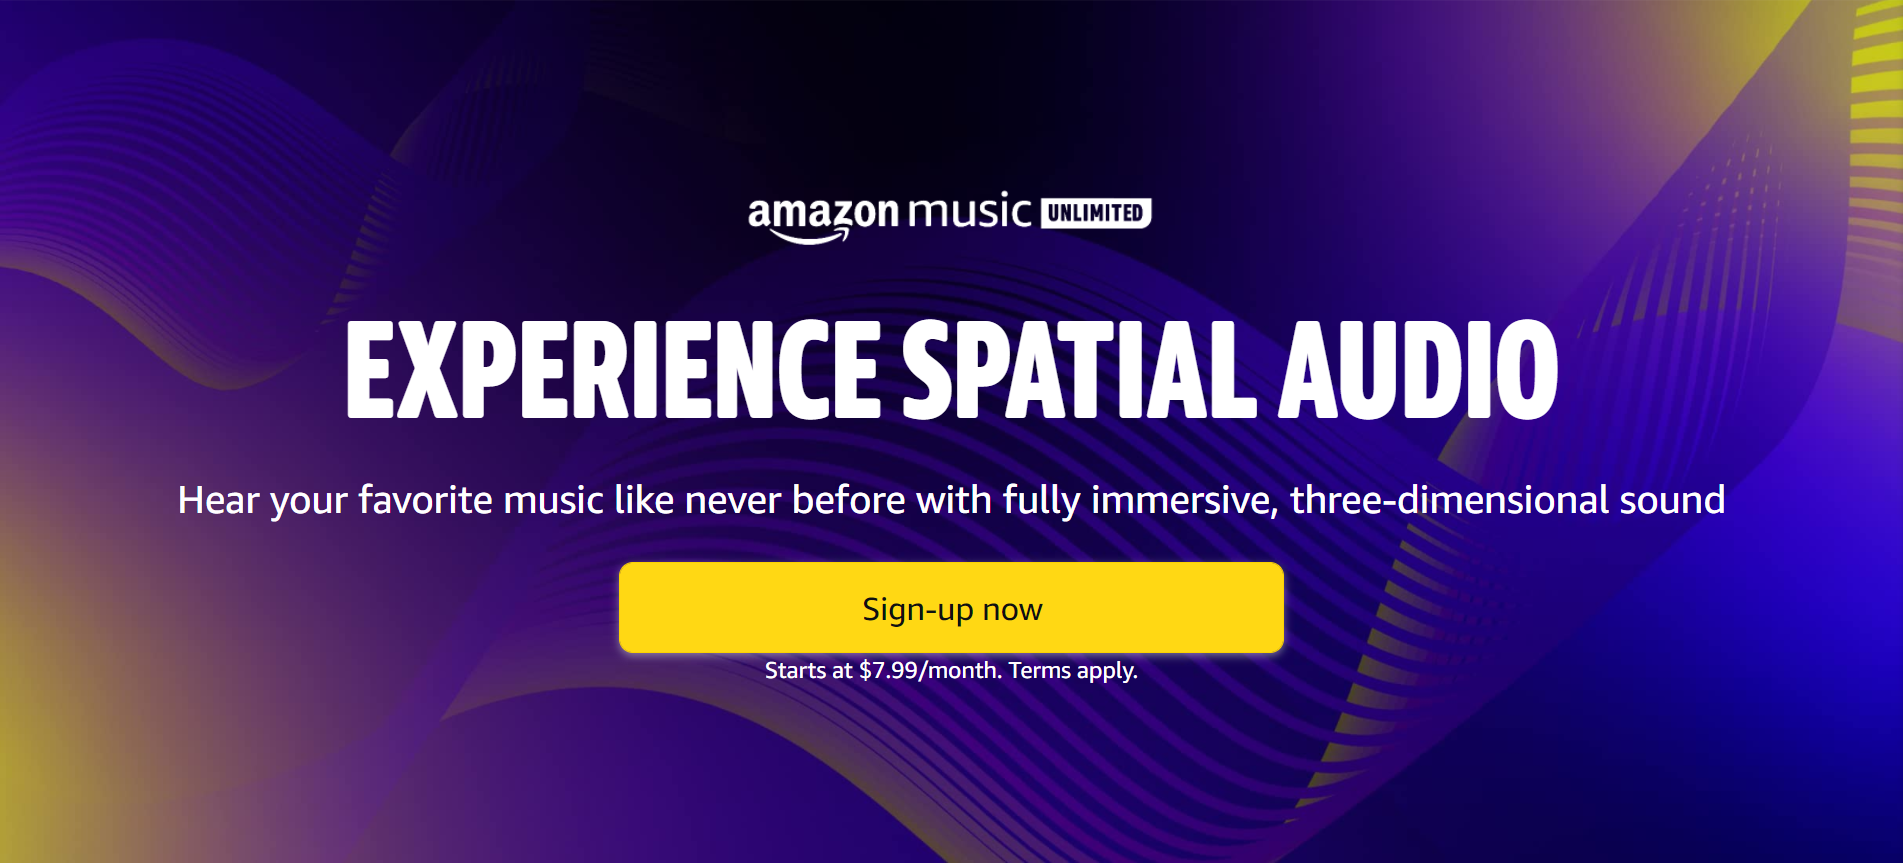 Amazon Music make spatial audio available with any headphones